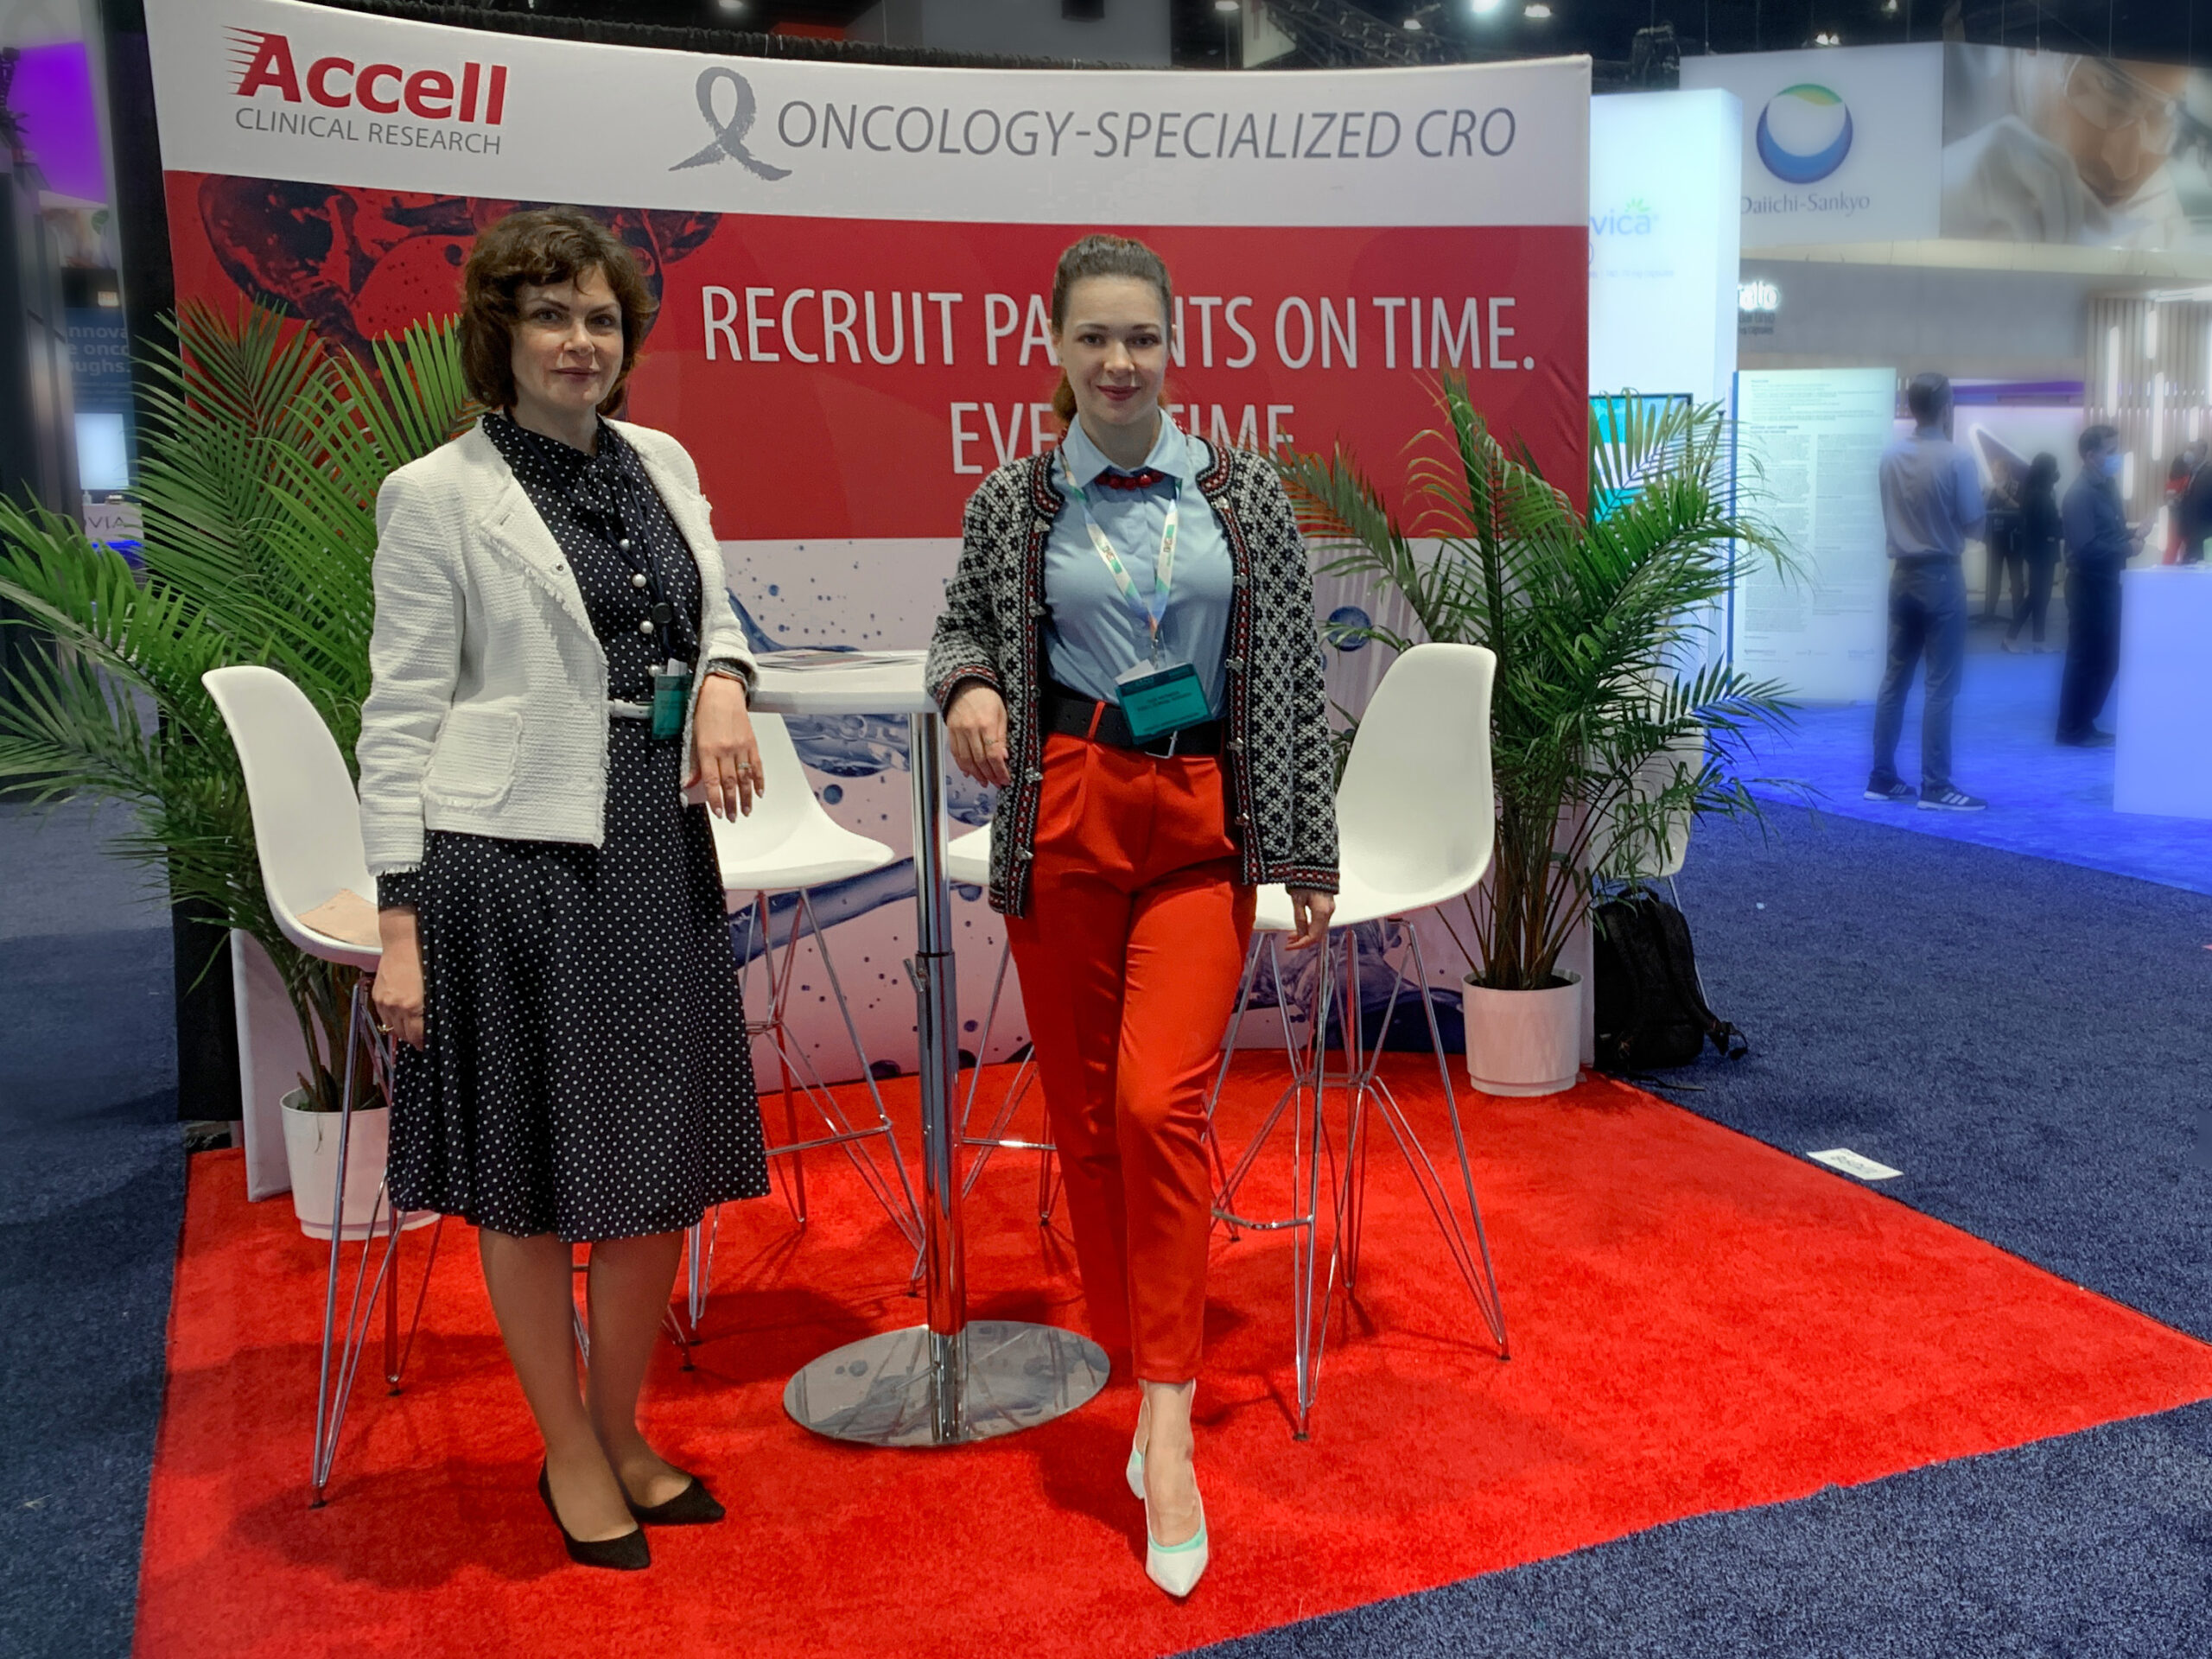 Accell Oncology Business Development Unit at ASCO Annual Meeting 2022